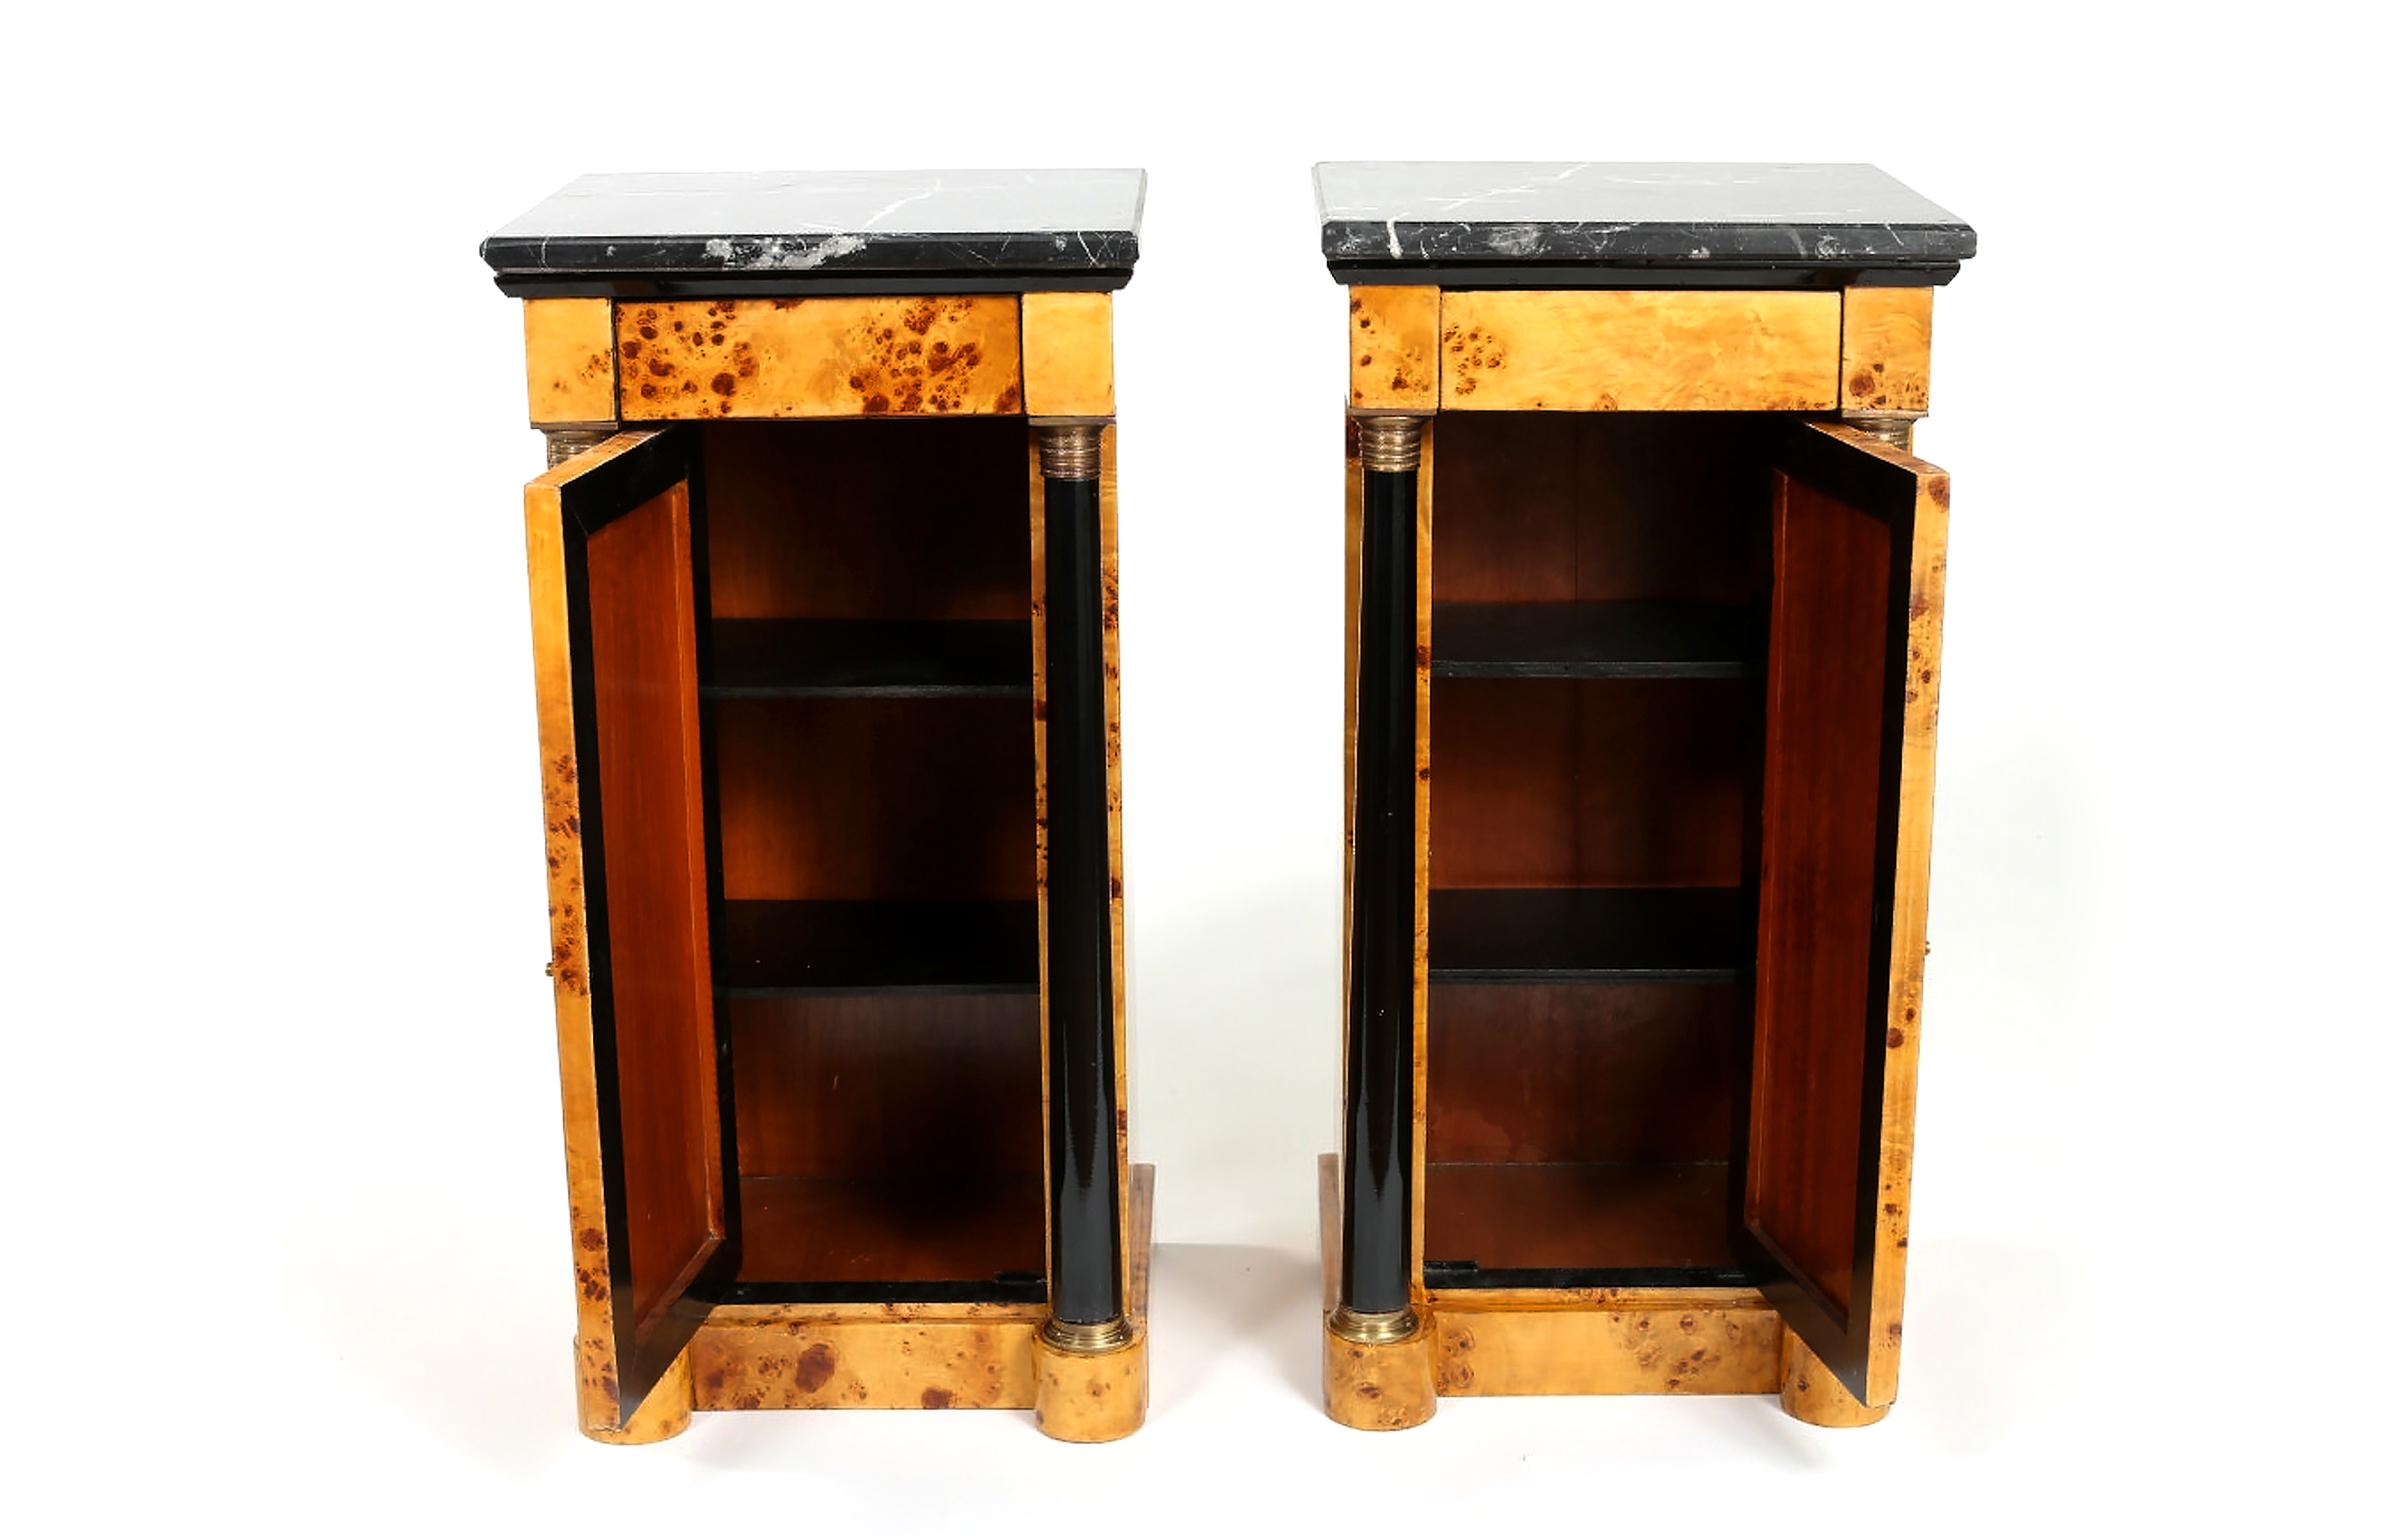 Pair early 20th century Empire style marble-top bar / wood half commodes with top drawer & front door. Each one is in good condition with wear appropriate to age / use. Each commode is about 31.5 inches high x 13.5 inches x 15 inches.